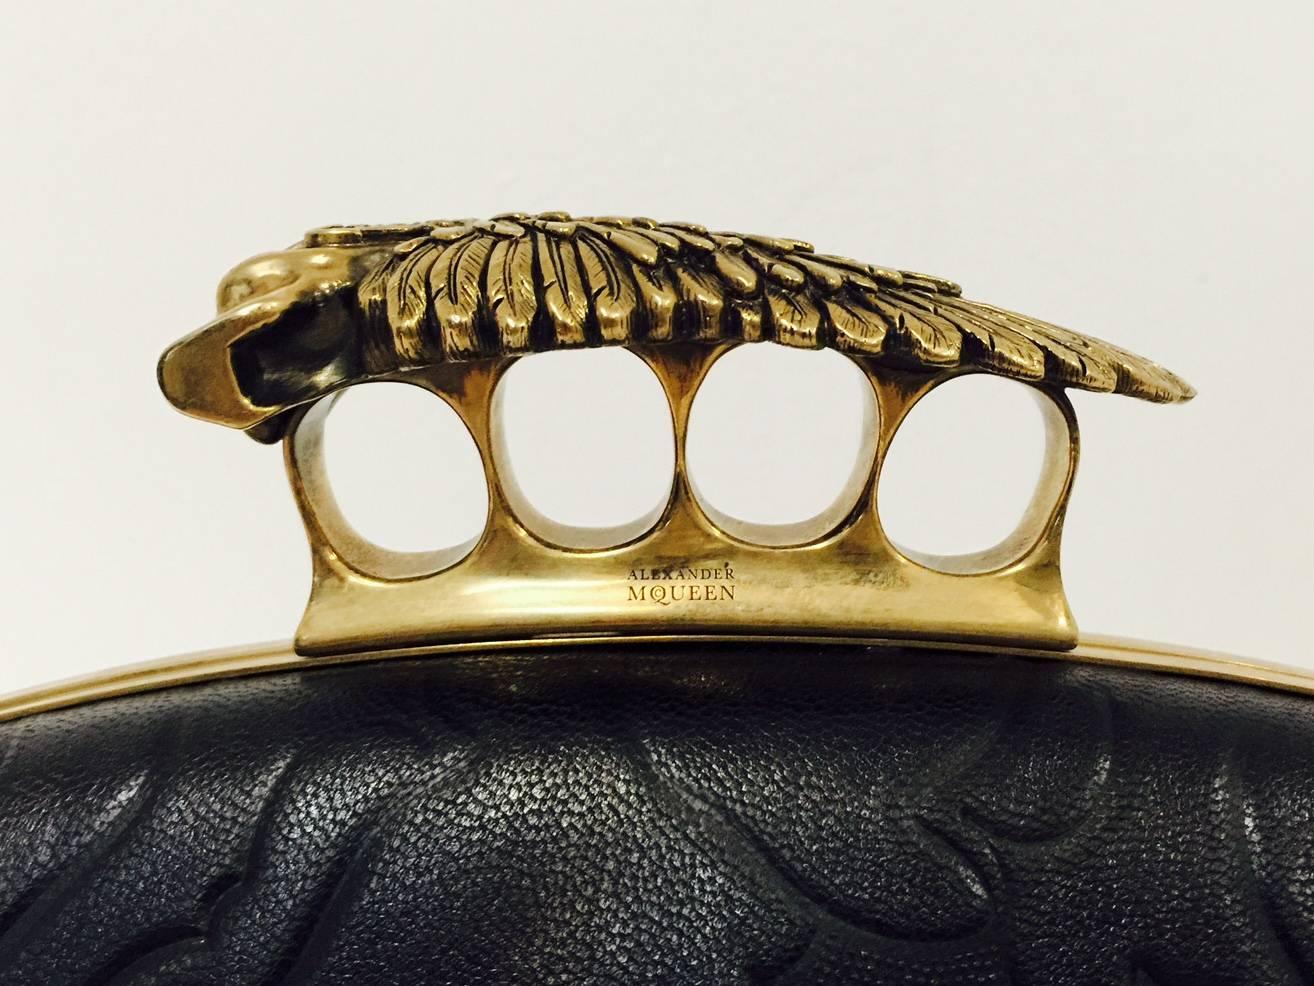 New Hell's Knuckle Duster box clutch is an instant classic and highly desired by connoisseurs and collectors of Alexander McQueen creations.  Featuring a winged death's head, brass hardware, and sumptuous leather, bag will garner admiration and a